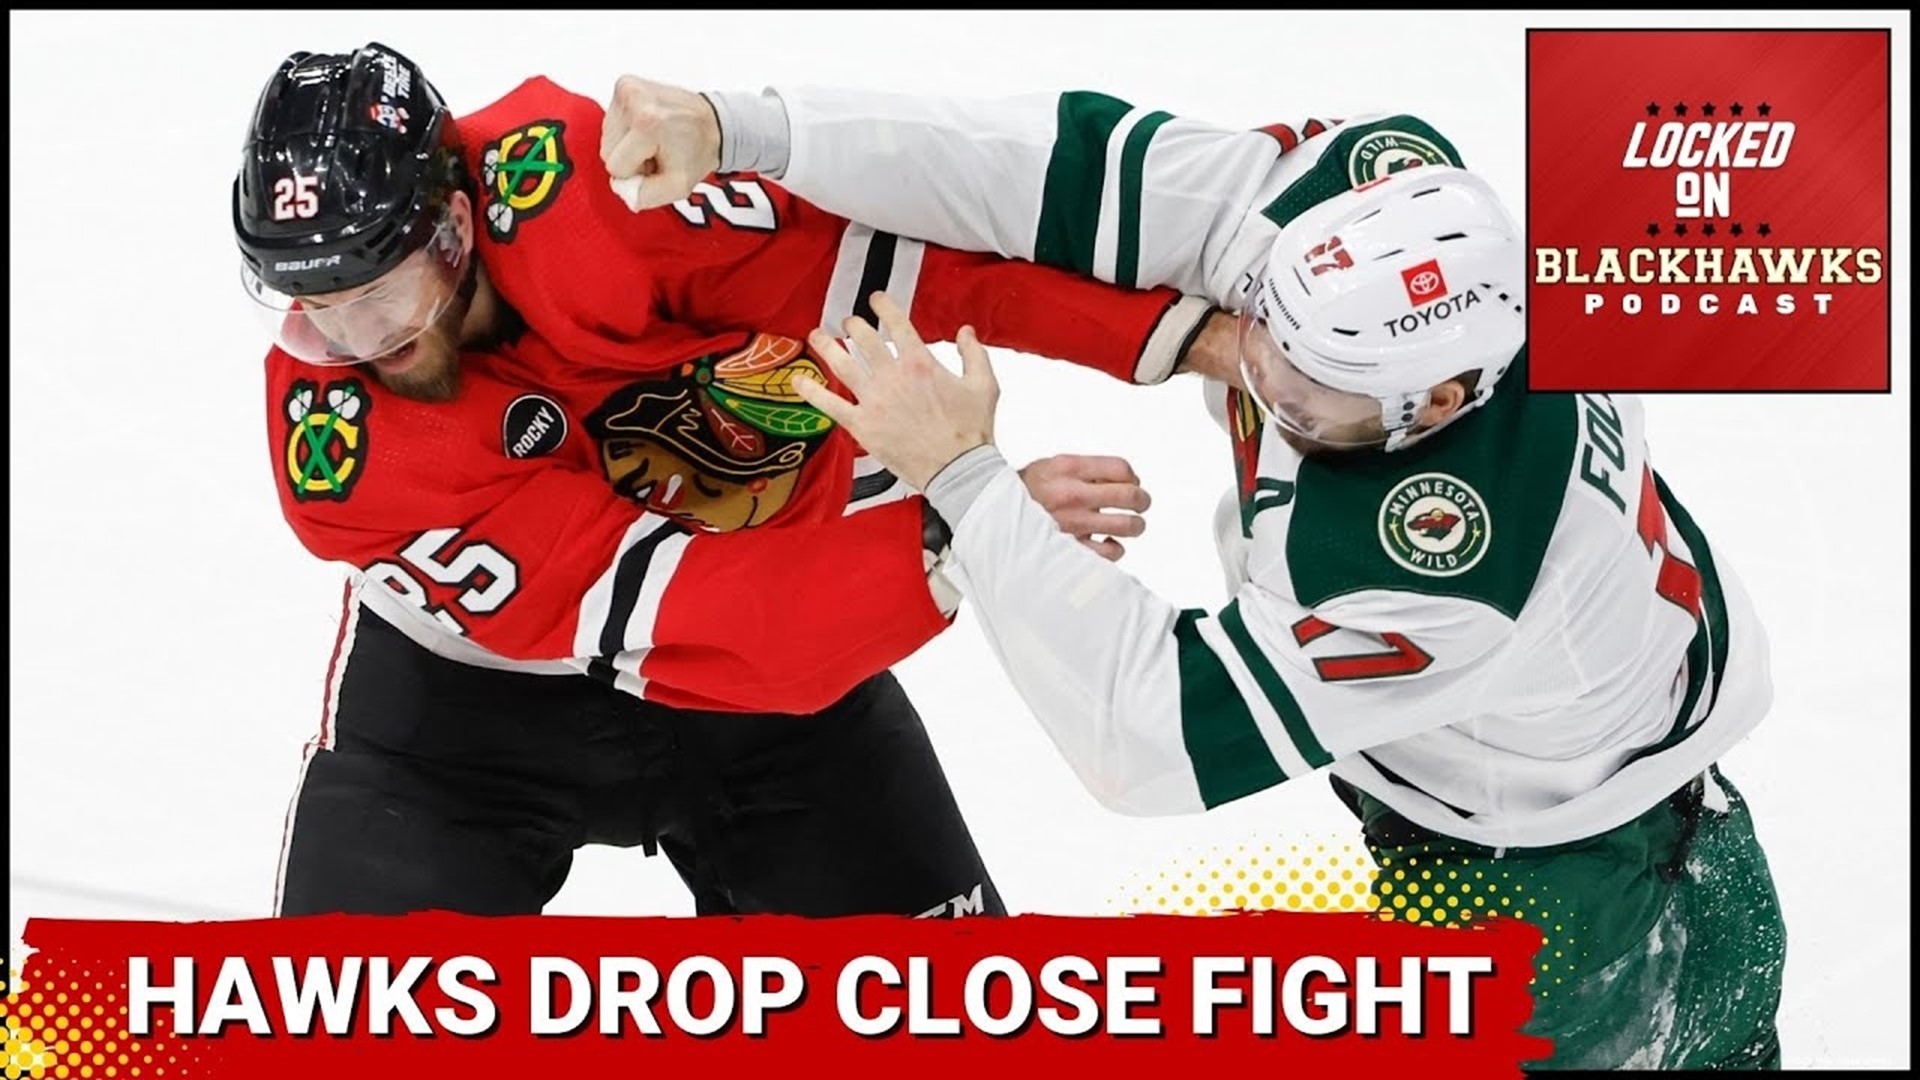 Thursday's episode begins with a recap of the Chicago Blackhawks' lackluster 2-1 loss to the Minnesota Wild.